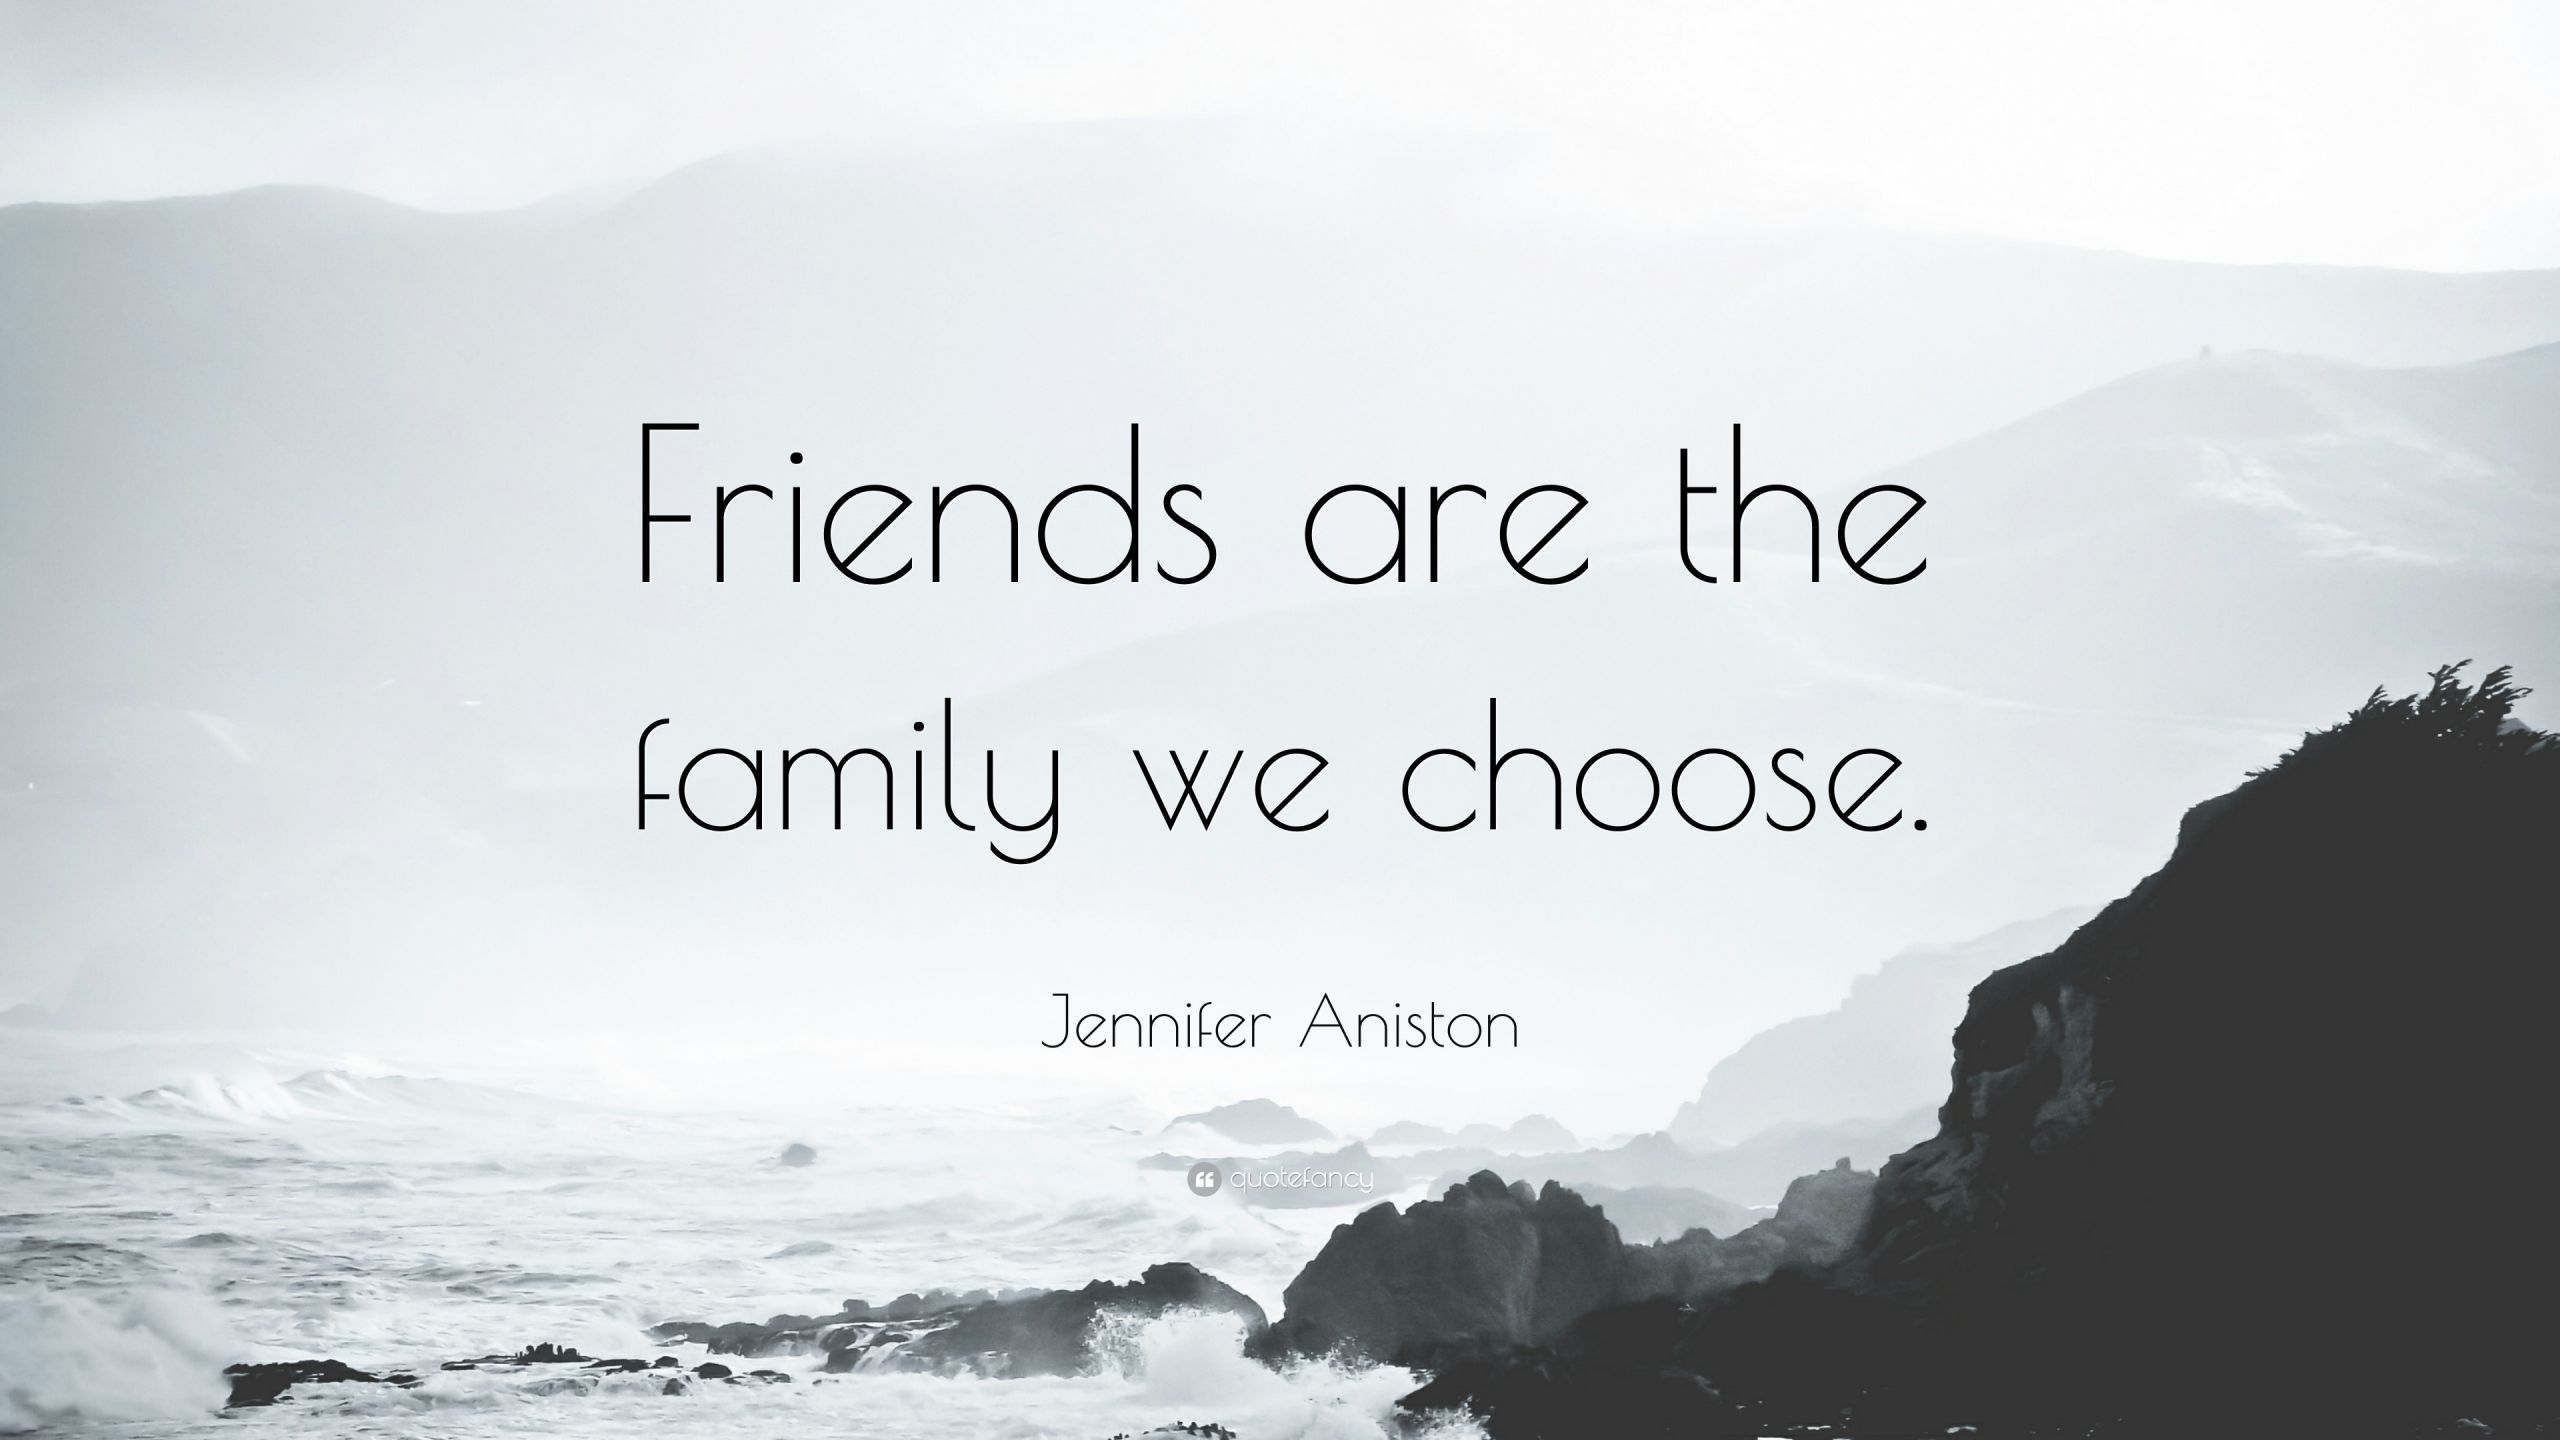 Friends Are The Family You Choose Quote
 Jennifer Aniston Quote “Friends are the family we choose